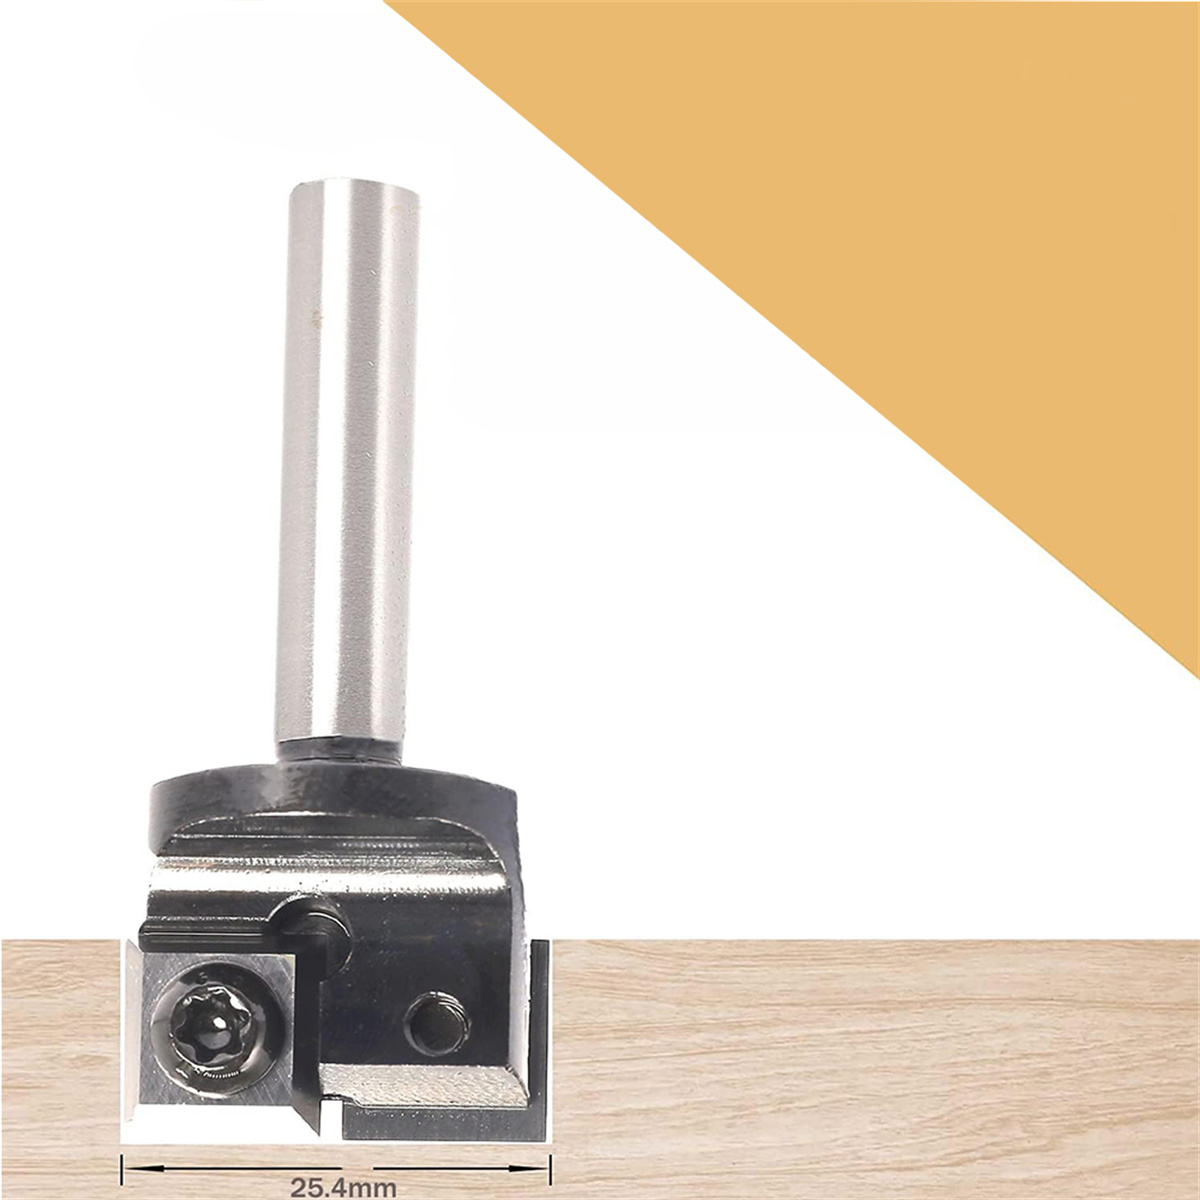 Hard Alloy Router Bit Versatile Woodworking Milling Cutters Two-Blade Vertical Milling Tools